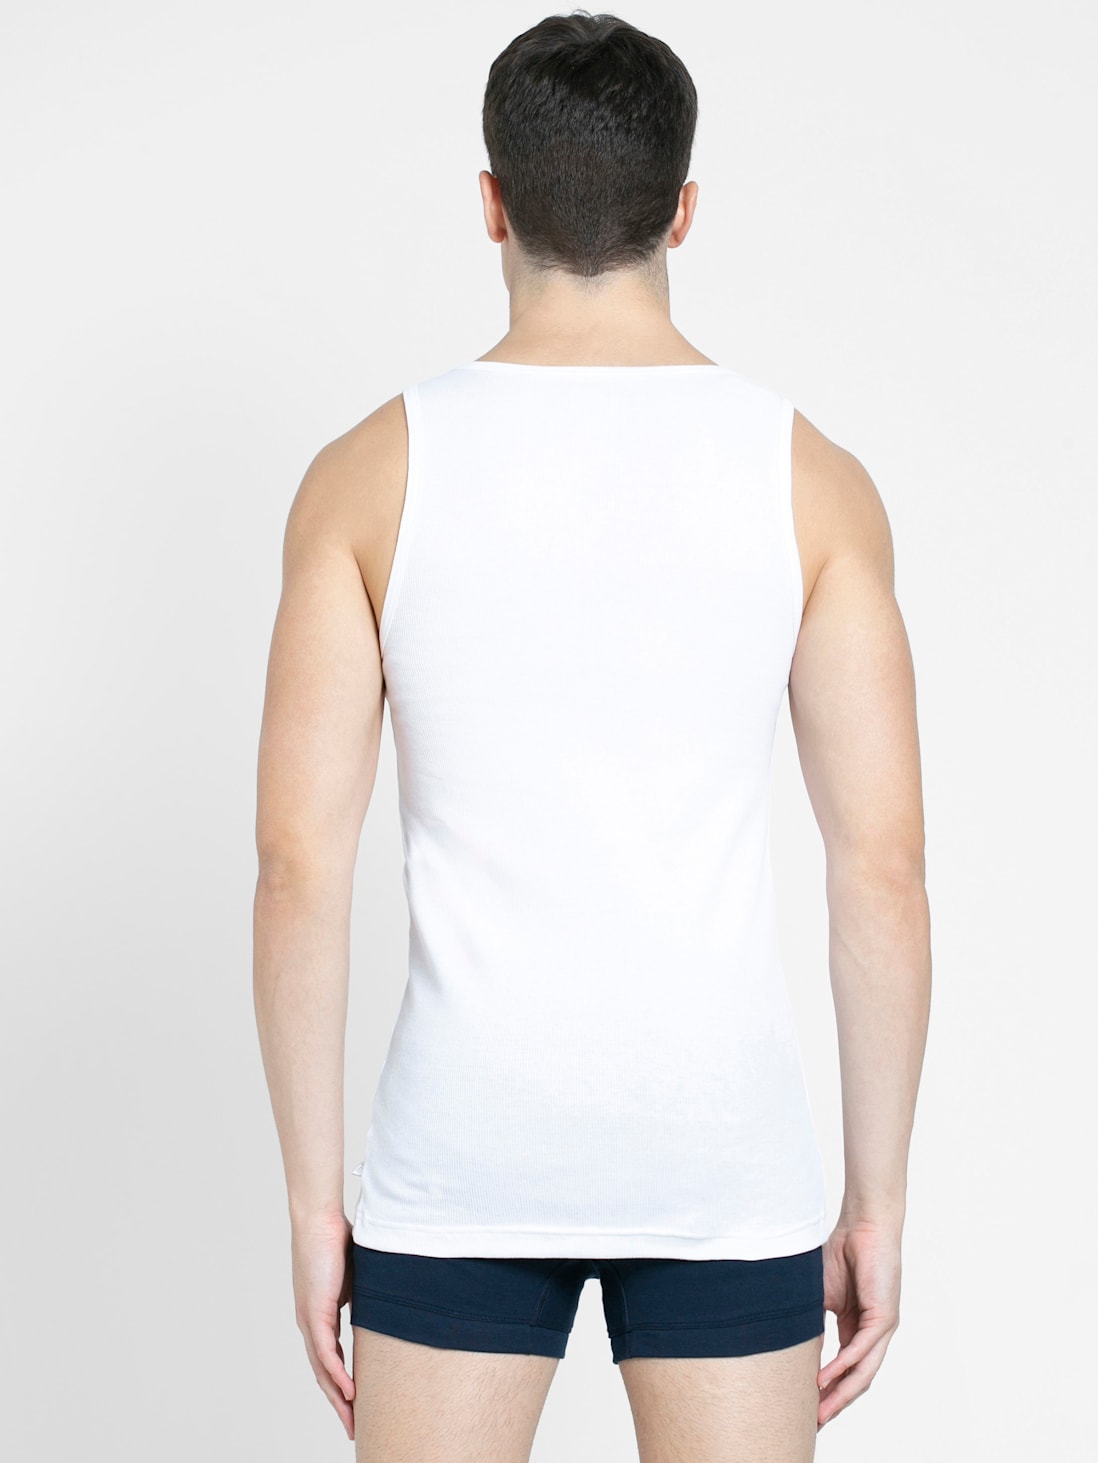 Jockey Men's Super Combed Cotton Rib Round Neck Sleeveless Vest with Stay Fresh Properties - White Pack of 2 - ShopIMO